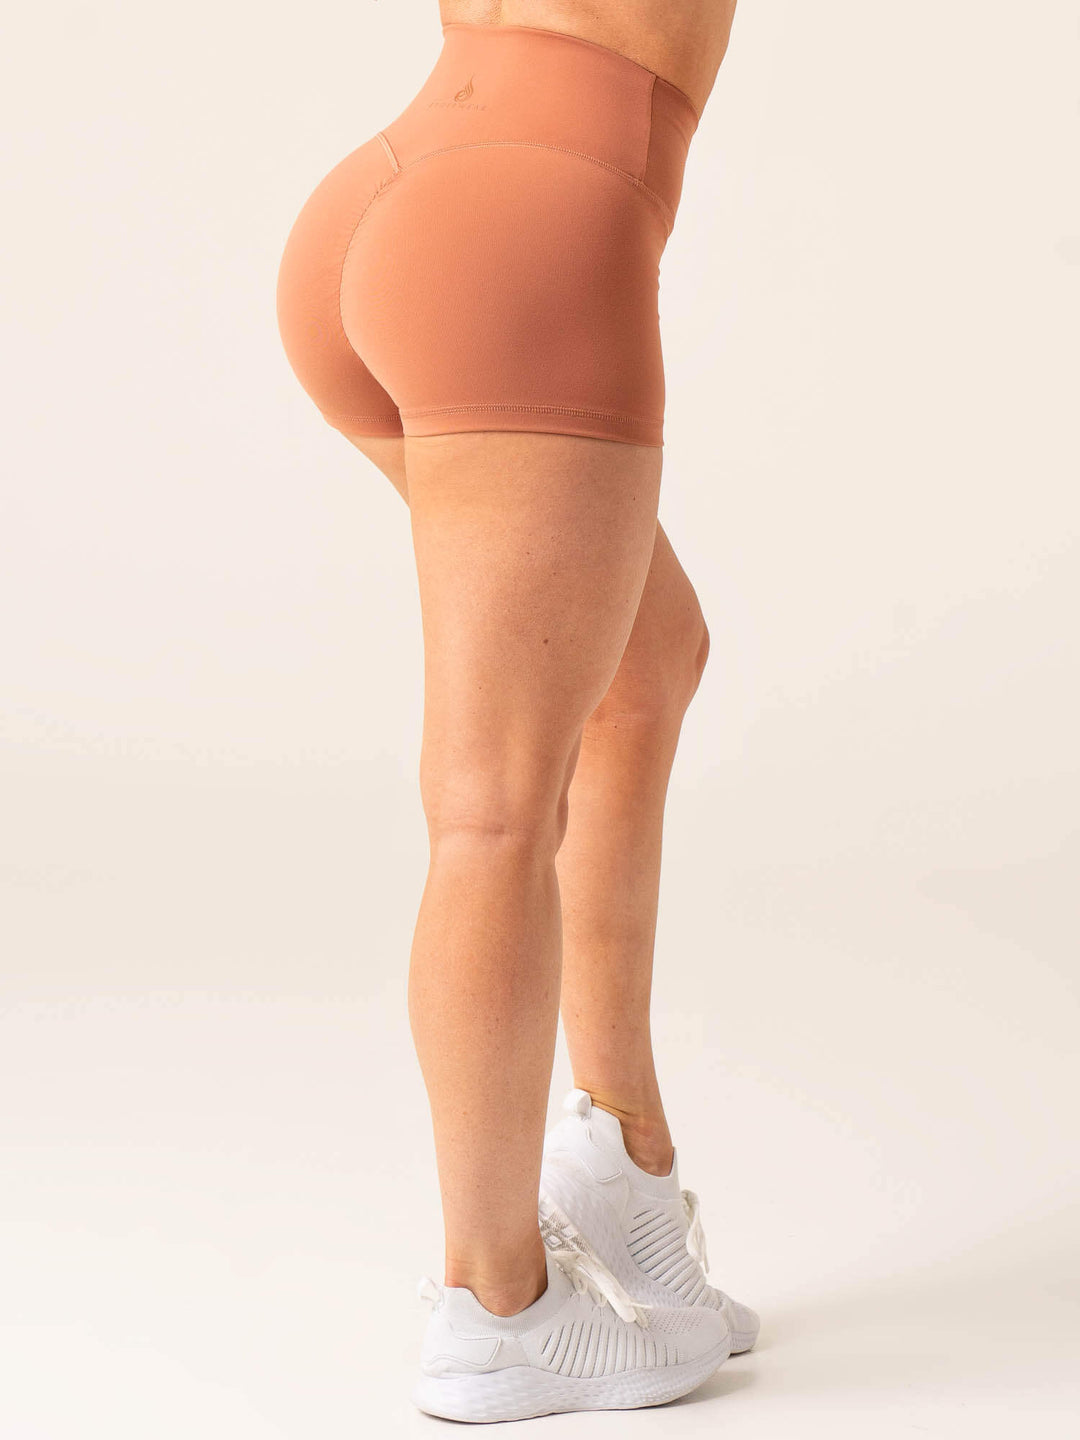 Momentum Cross Over Scrunch Booty Shorts - Clay Clothing Ryderwear 